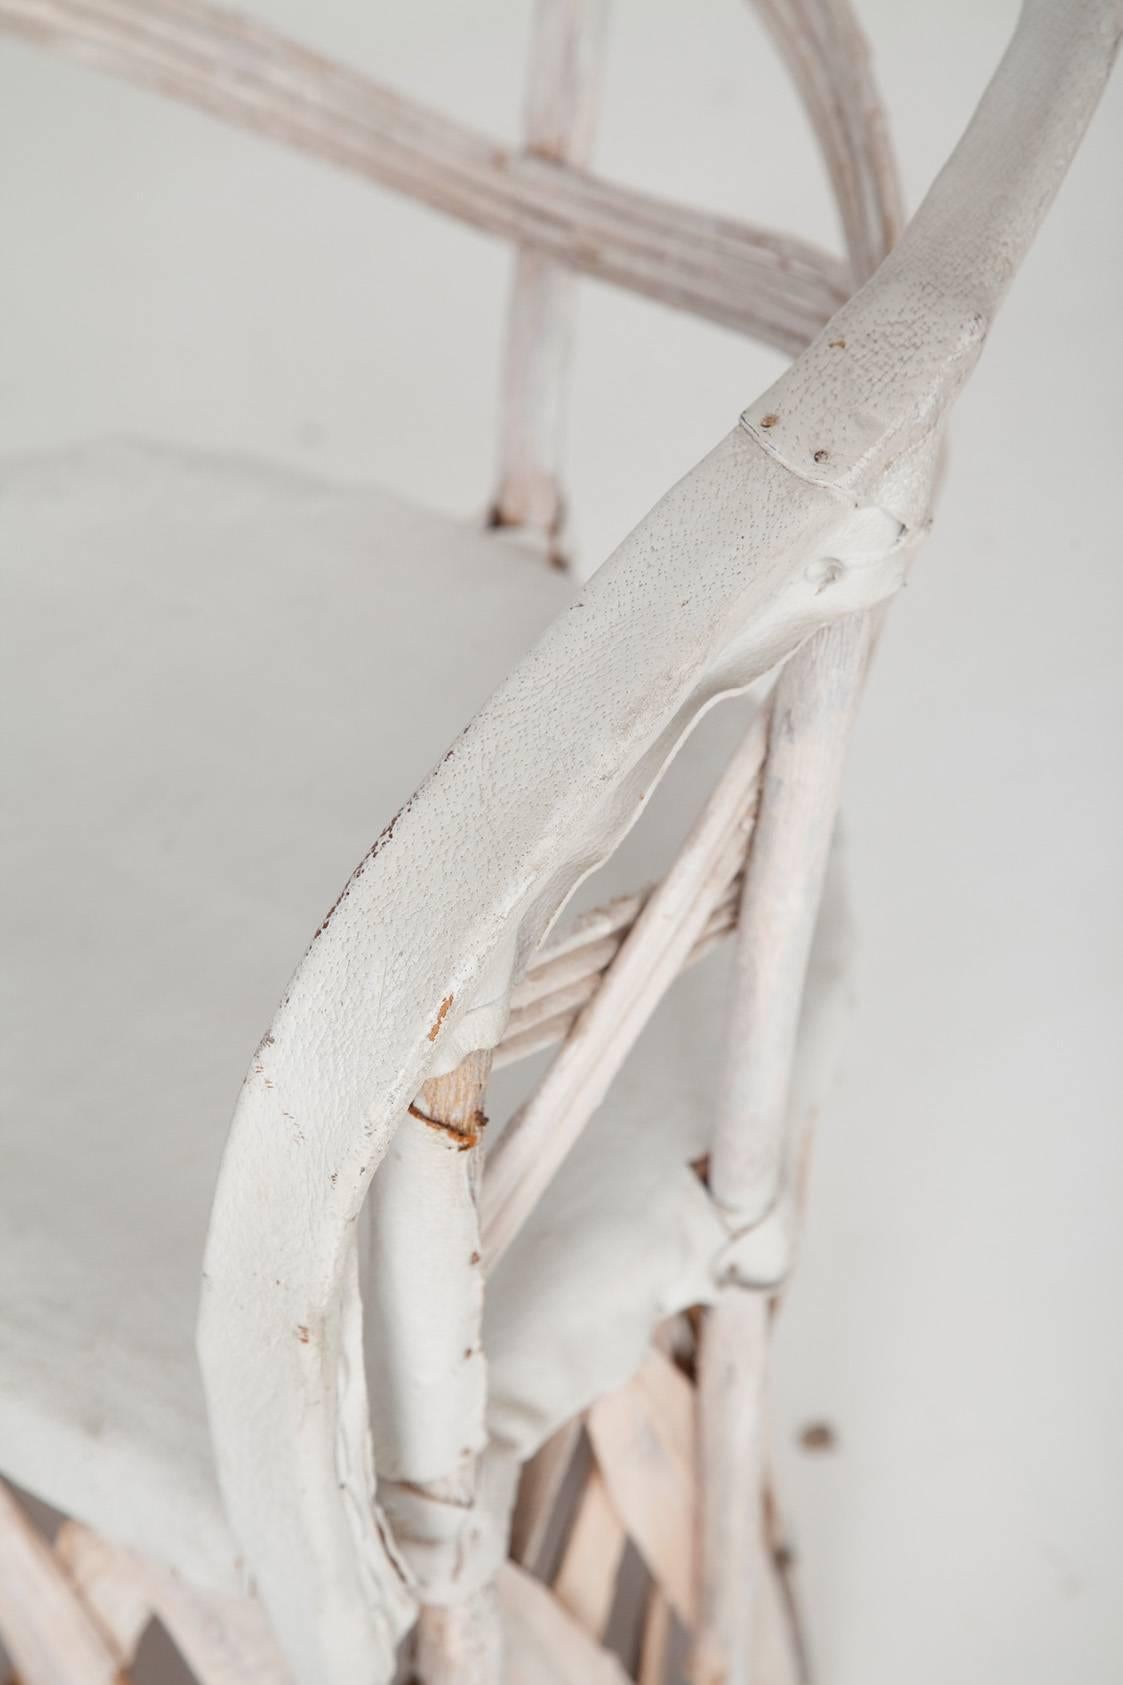 Mexican Whitewashed Equipale Chairs